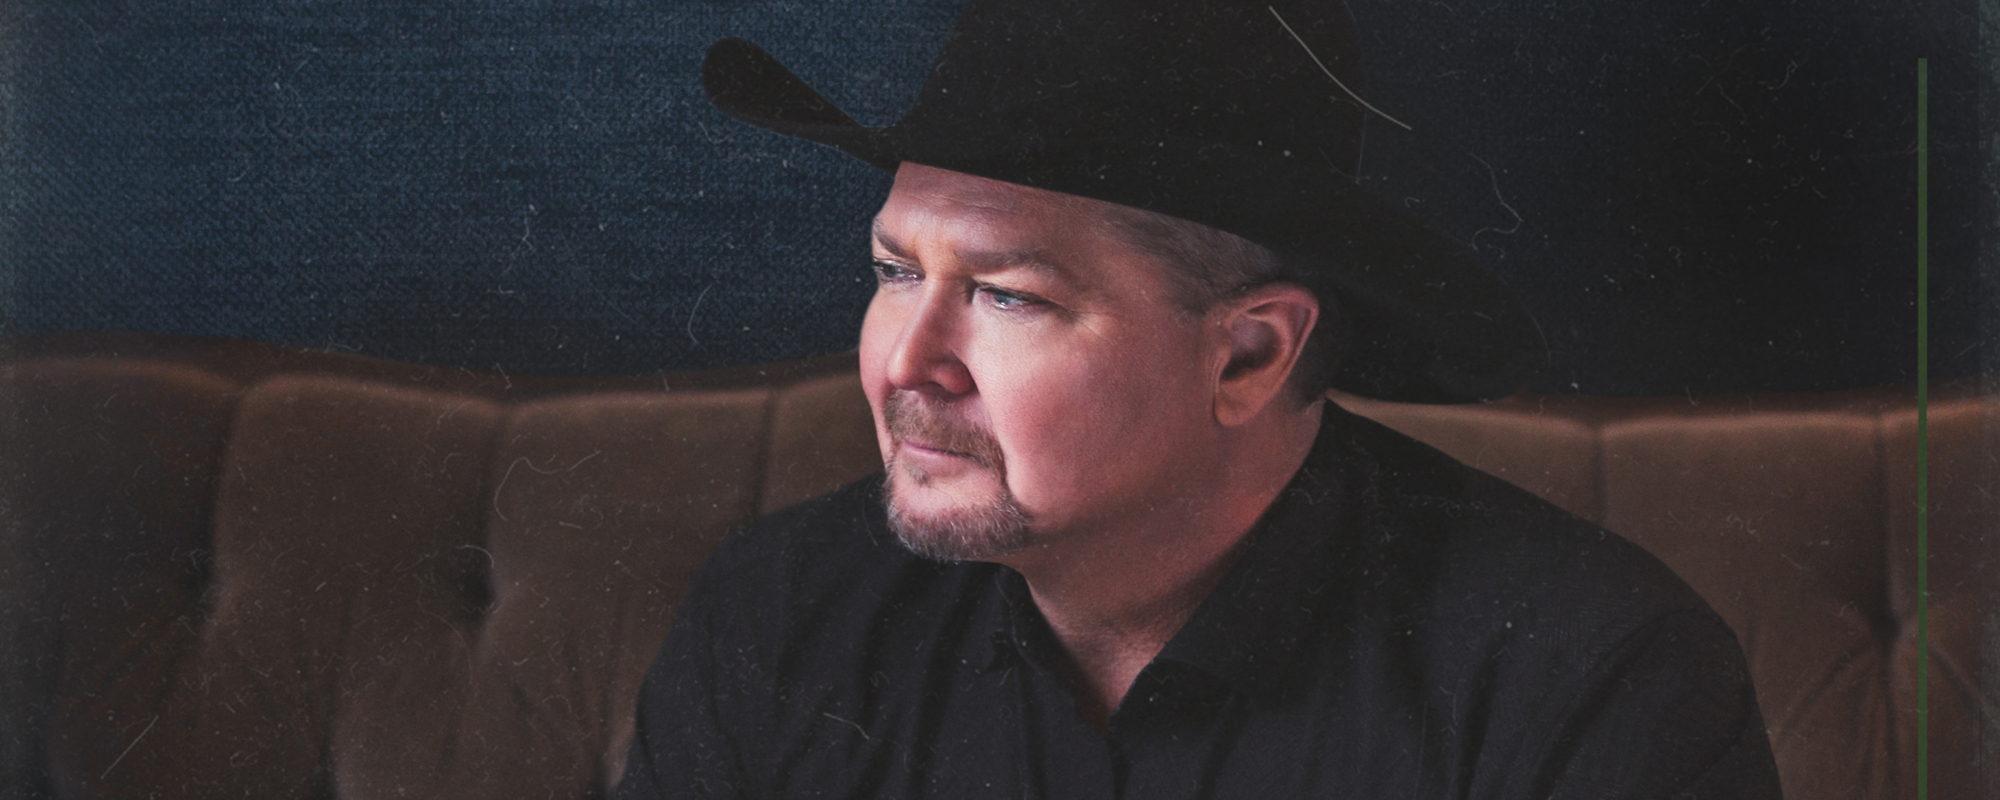 Tracy Lawrence on 30 Years of Impact, Writer’s Block & Learning a New Language